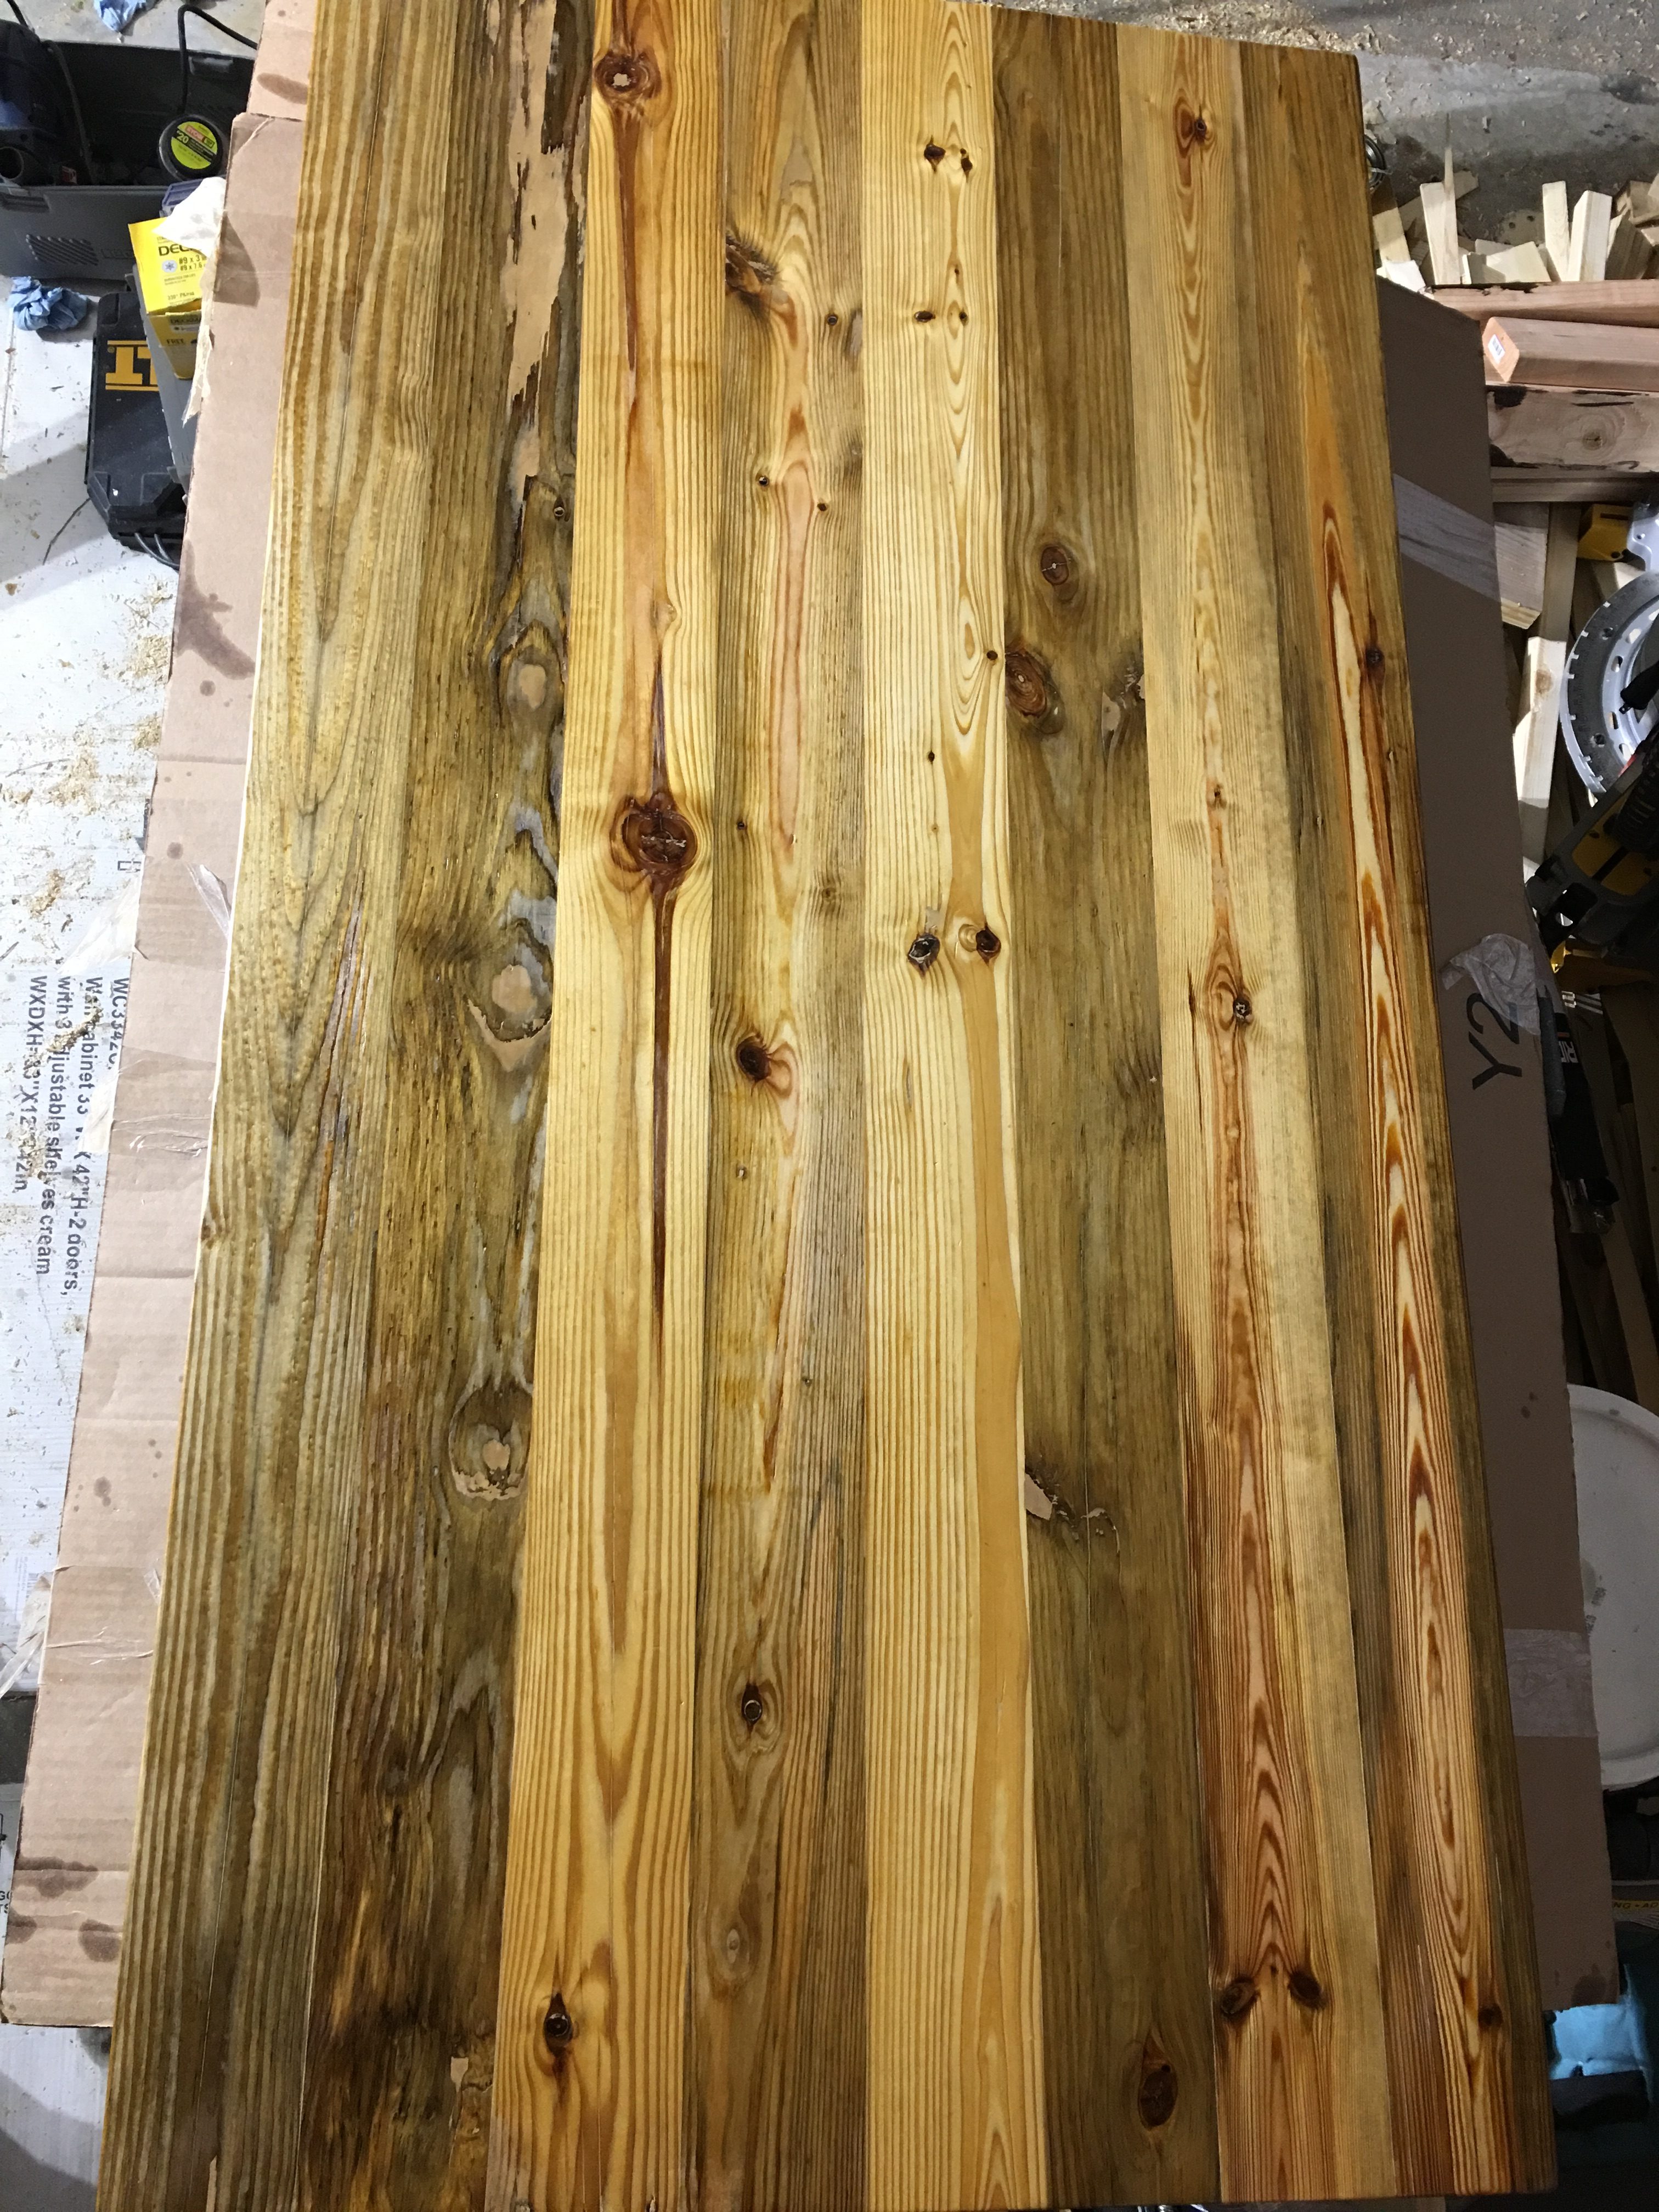 staining - Can I decorate linseed oil treated wood table with a